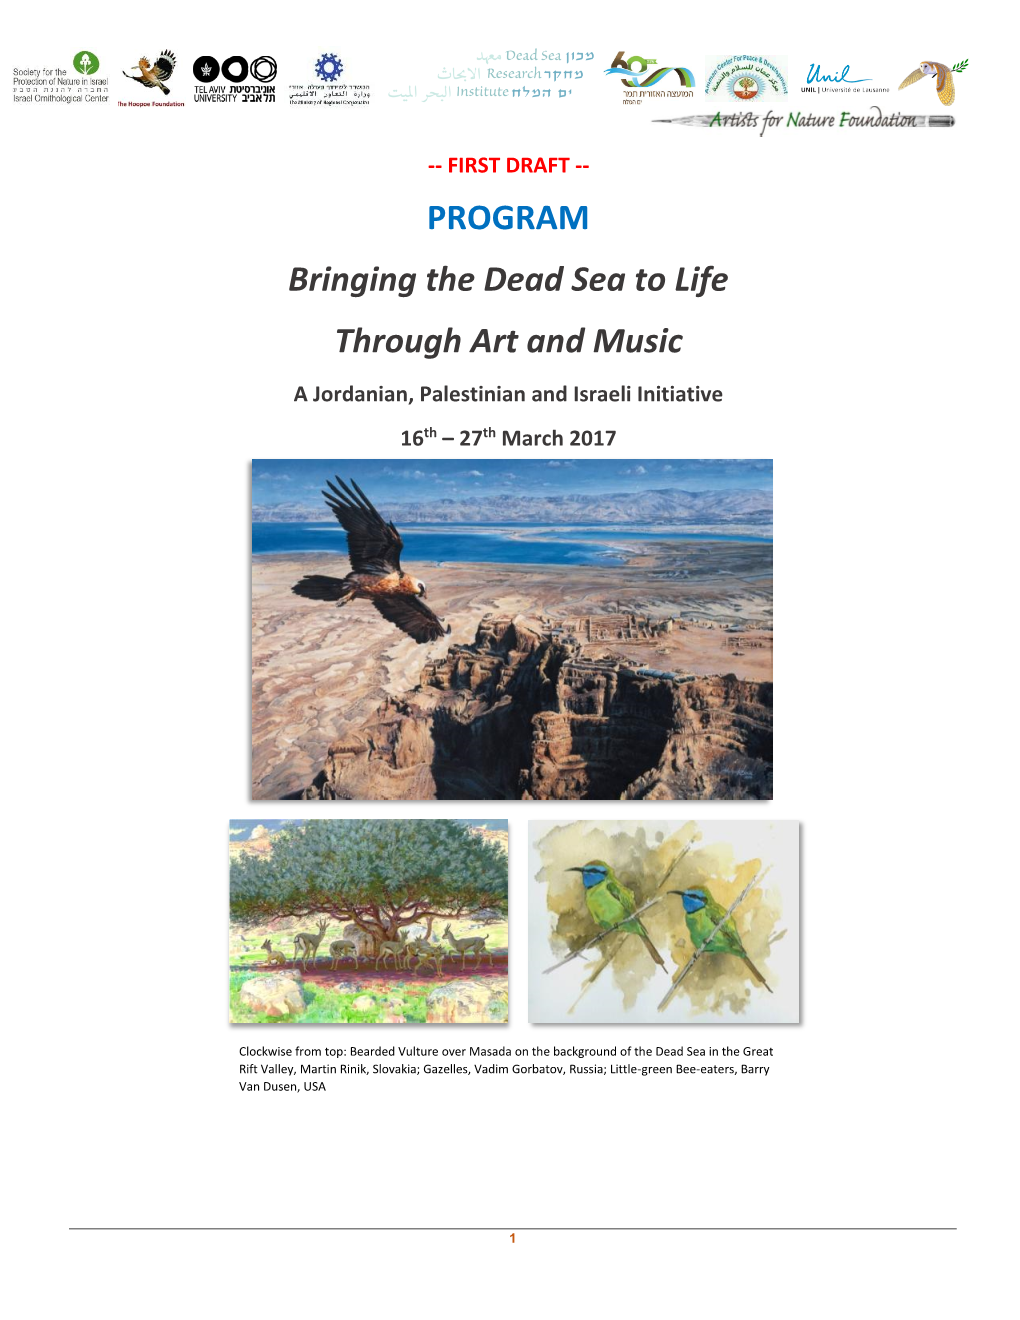 PROGRAM Bringing the Dead Sea to Life Through Art and Music a Jordanian, Palestinian and Israeli Initiative 16Th – 27Th March 2017